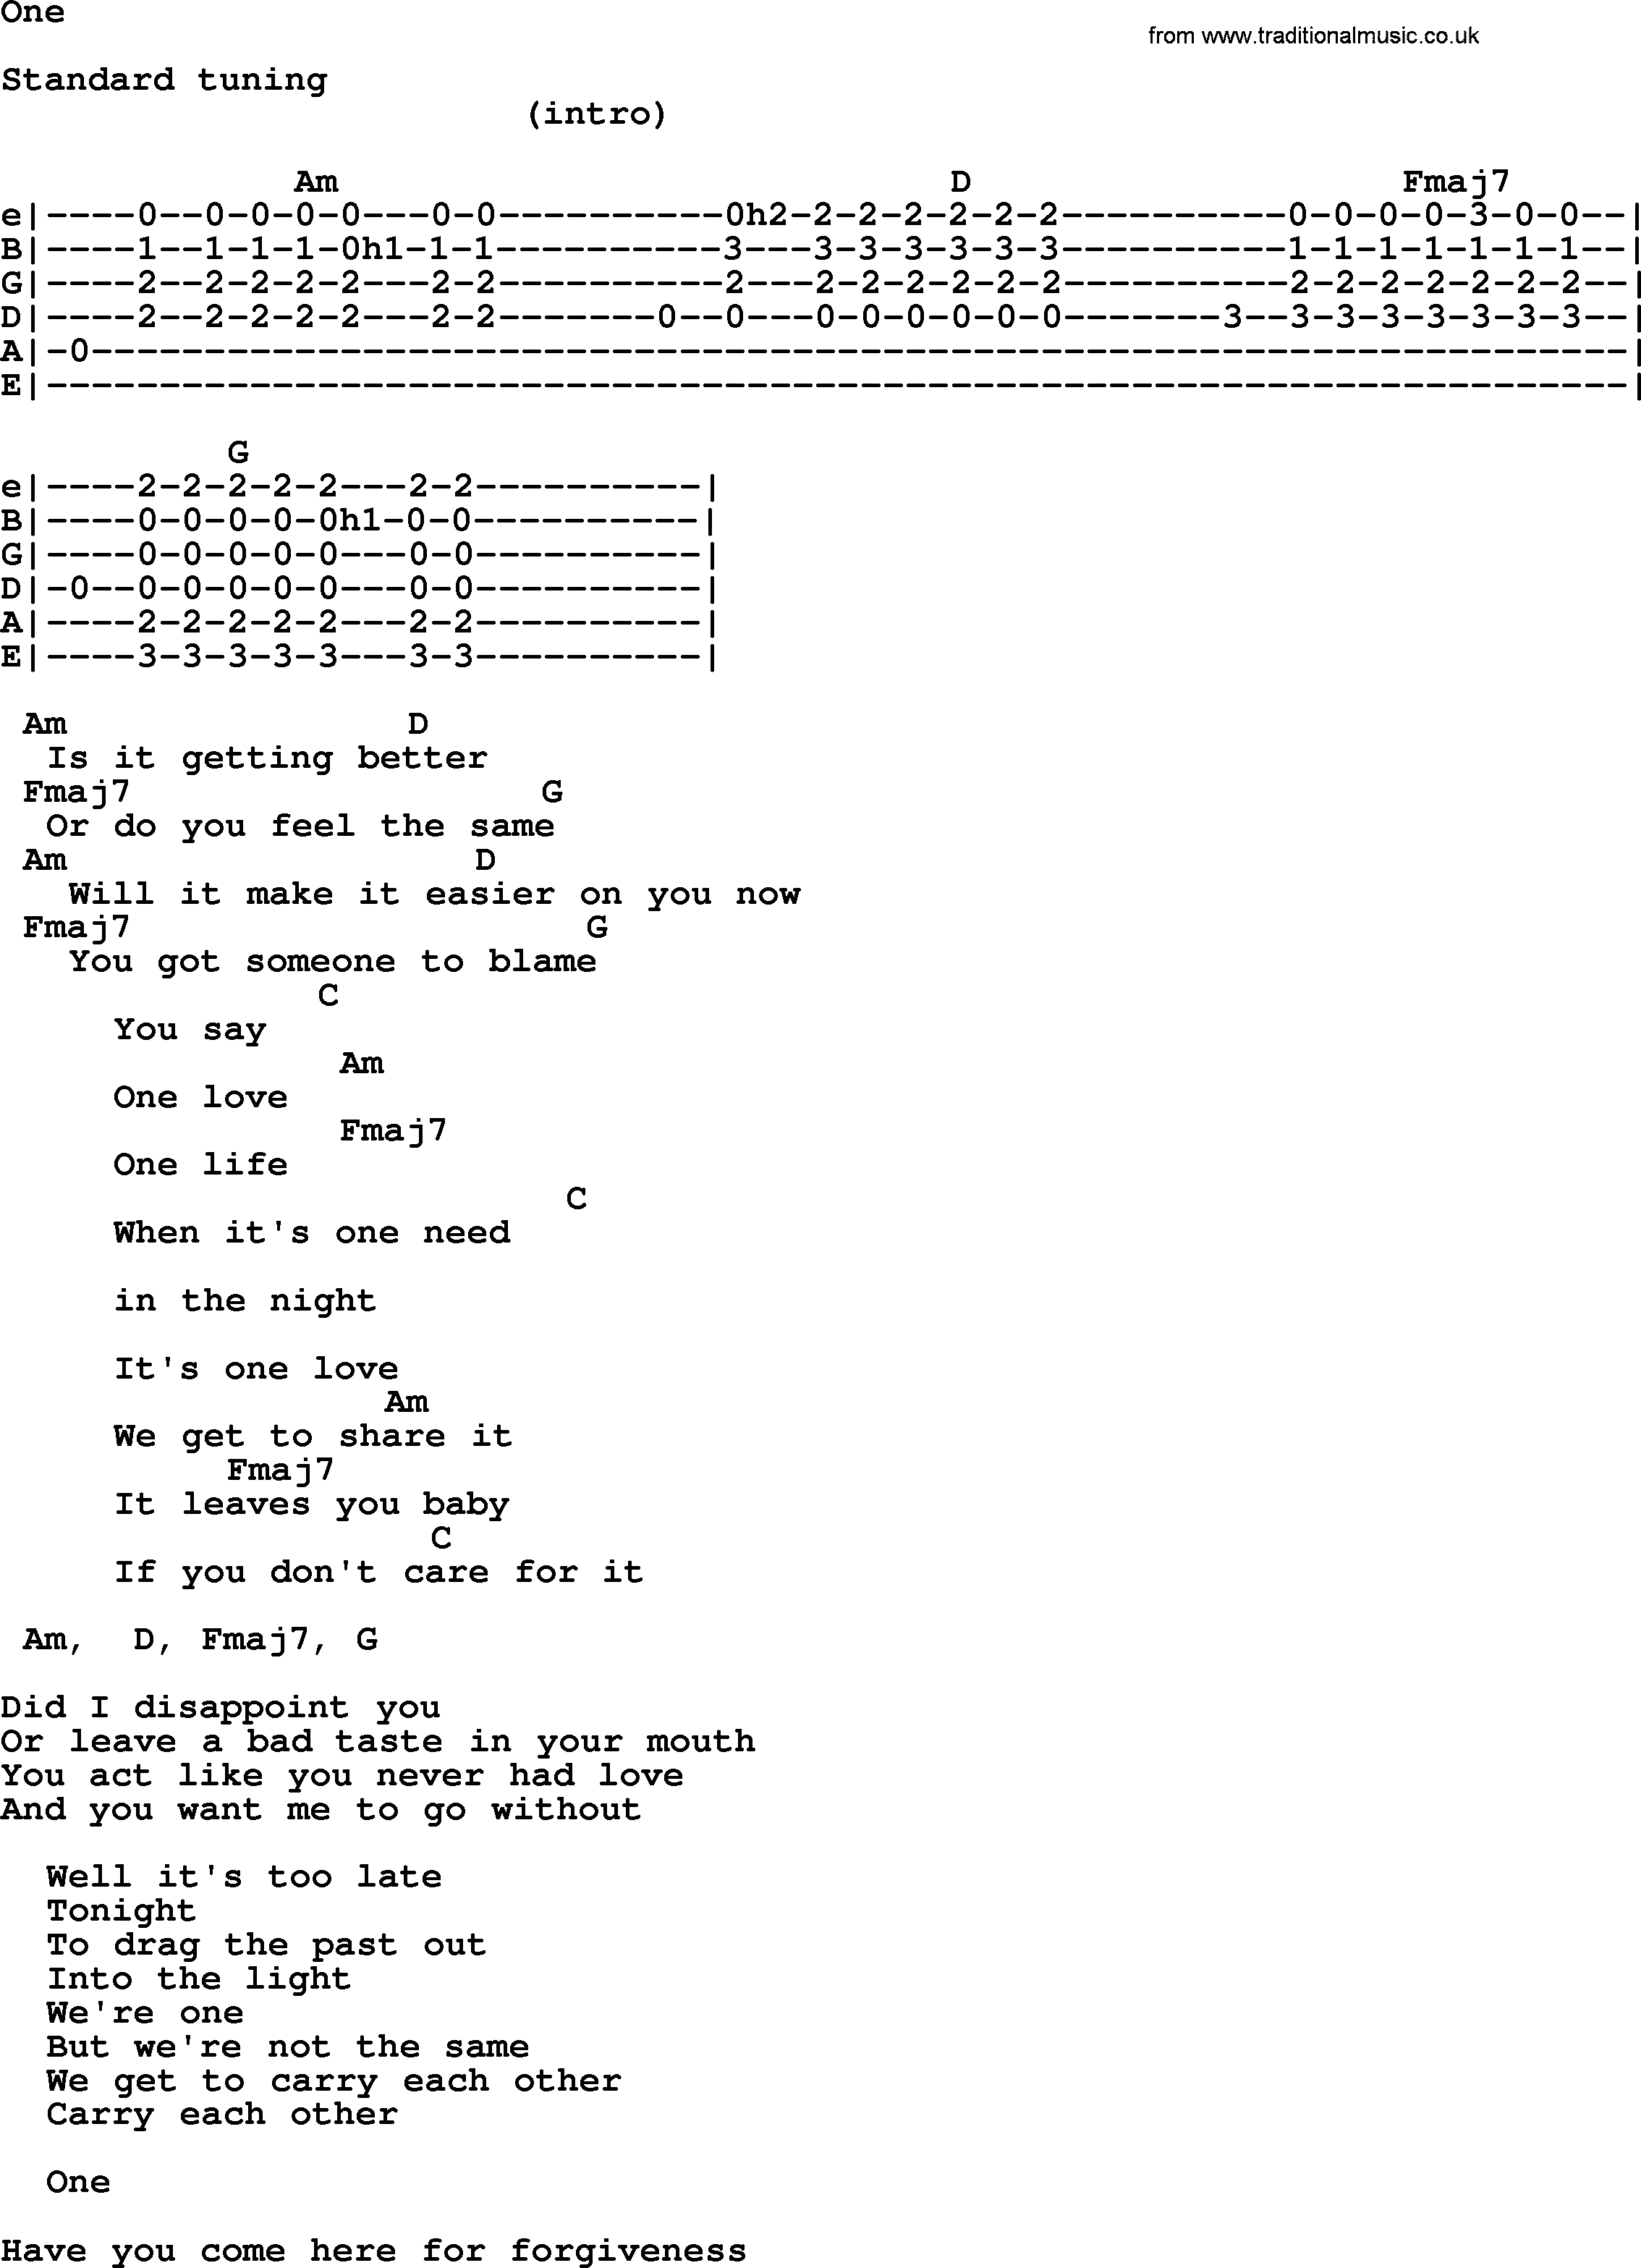 Johnny Cash song One, lyrics and chords